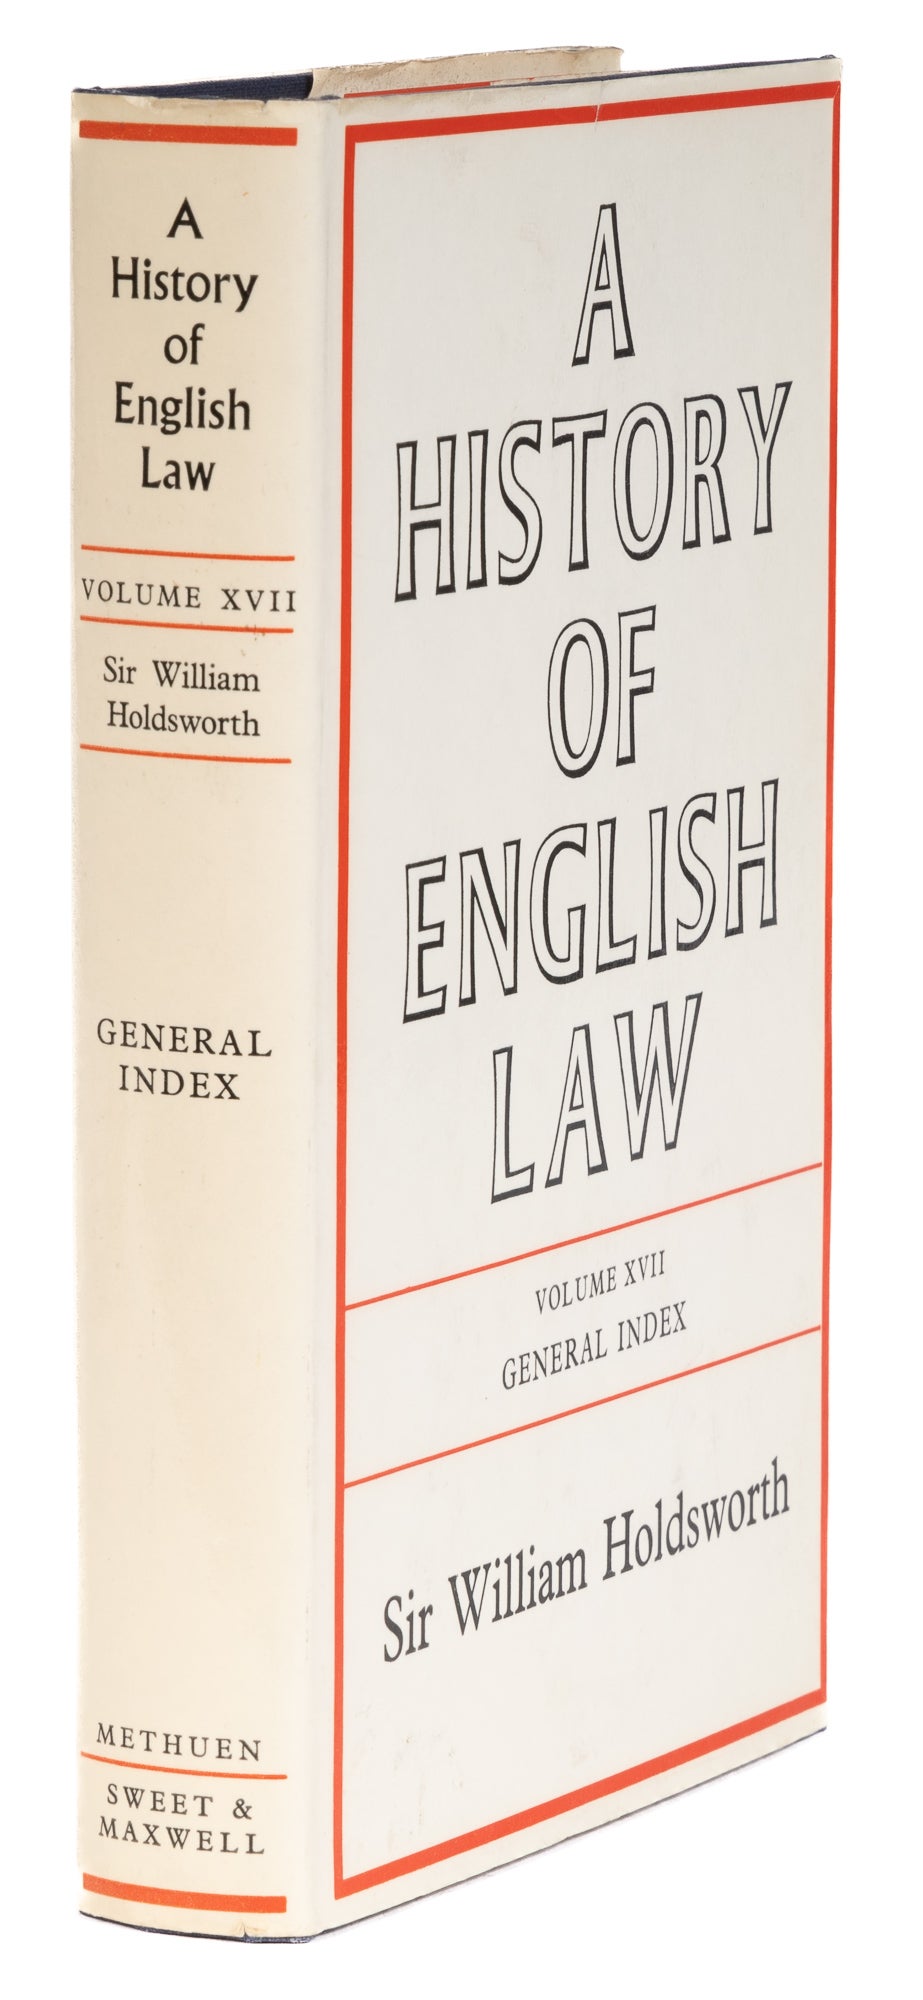 A History of English Law, Vol XVII, General Index, with dust jacket by Sir  William Holdsworth, John Burke, Compiler on The Lawbook Exchange, Ltd